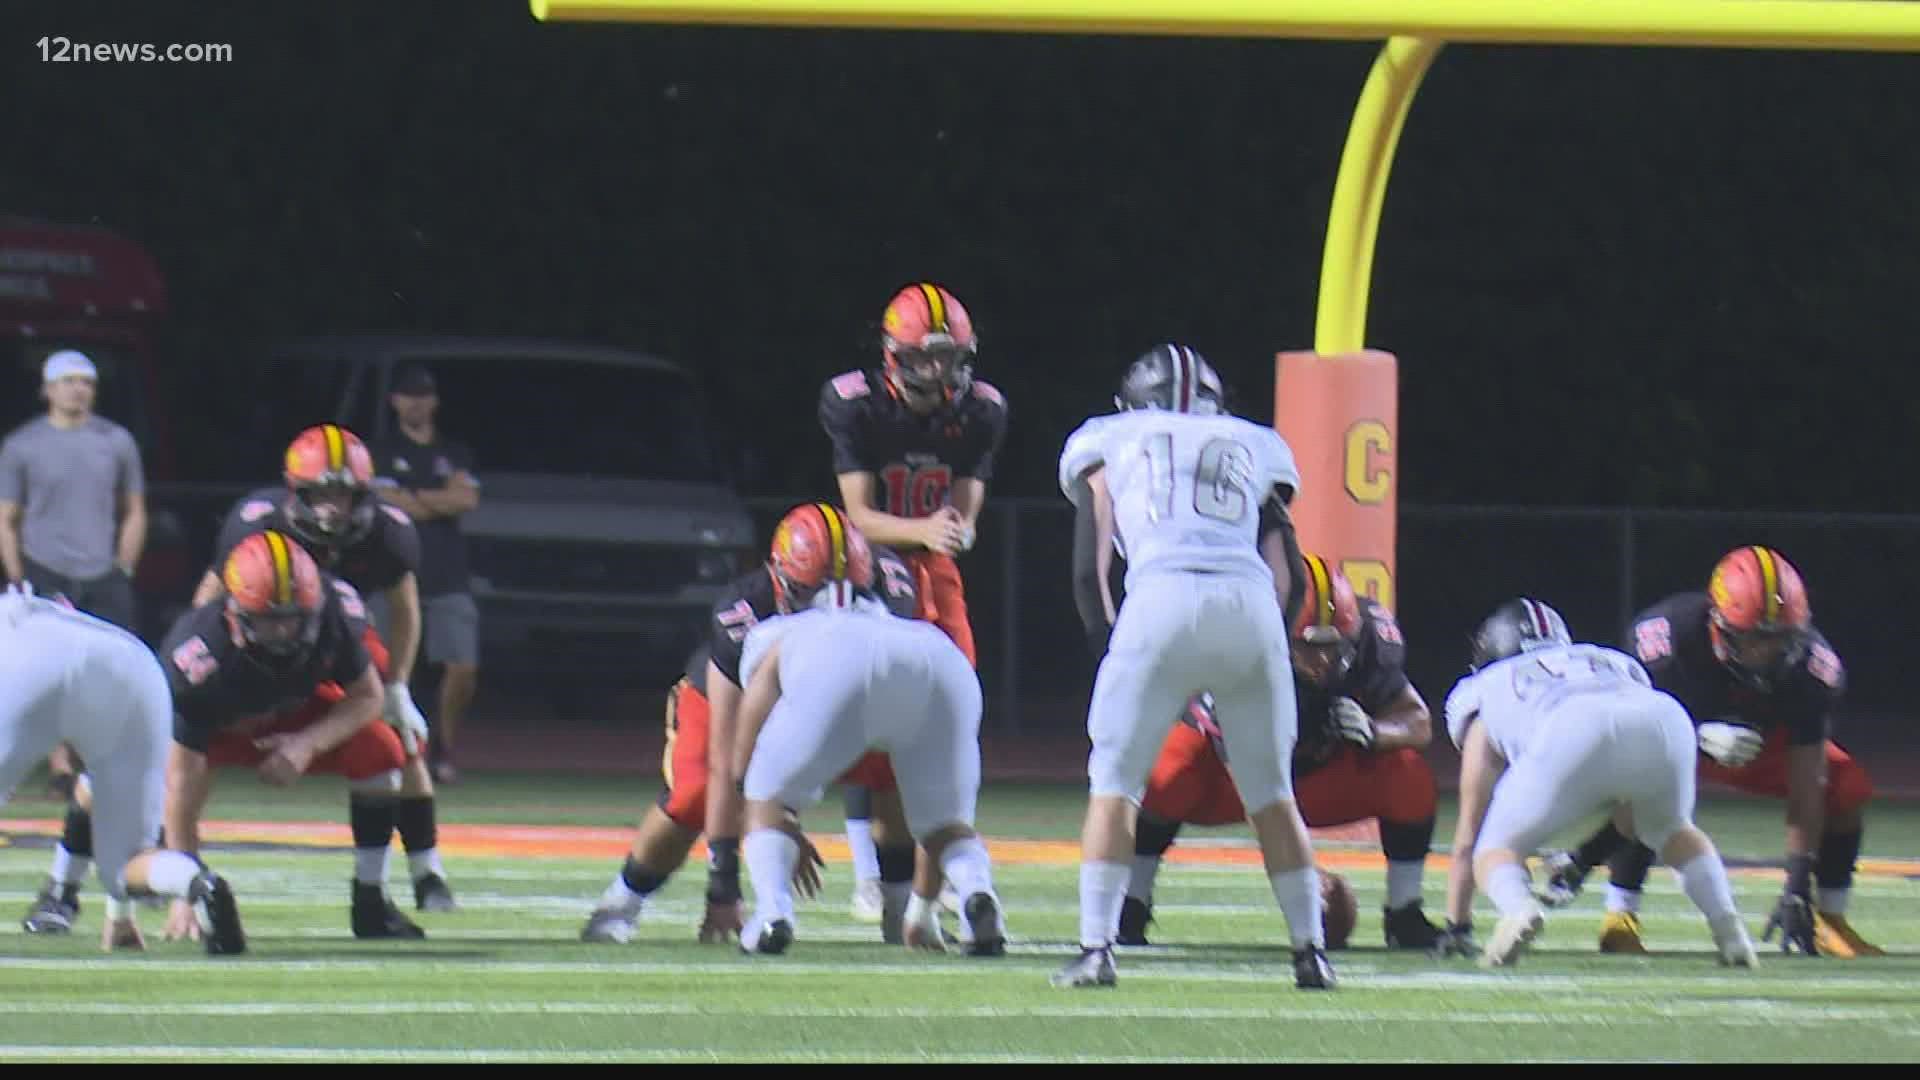 Red Mountain's record stays perfect after they defeated Corona Del Sol, 28-7.